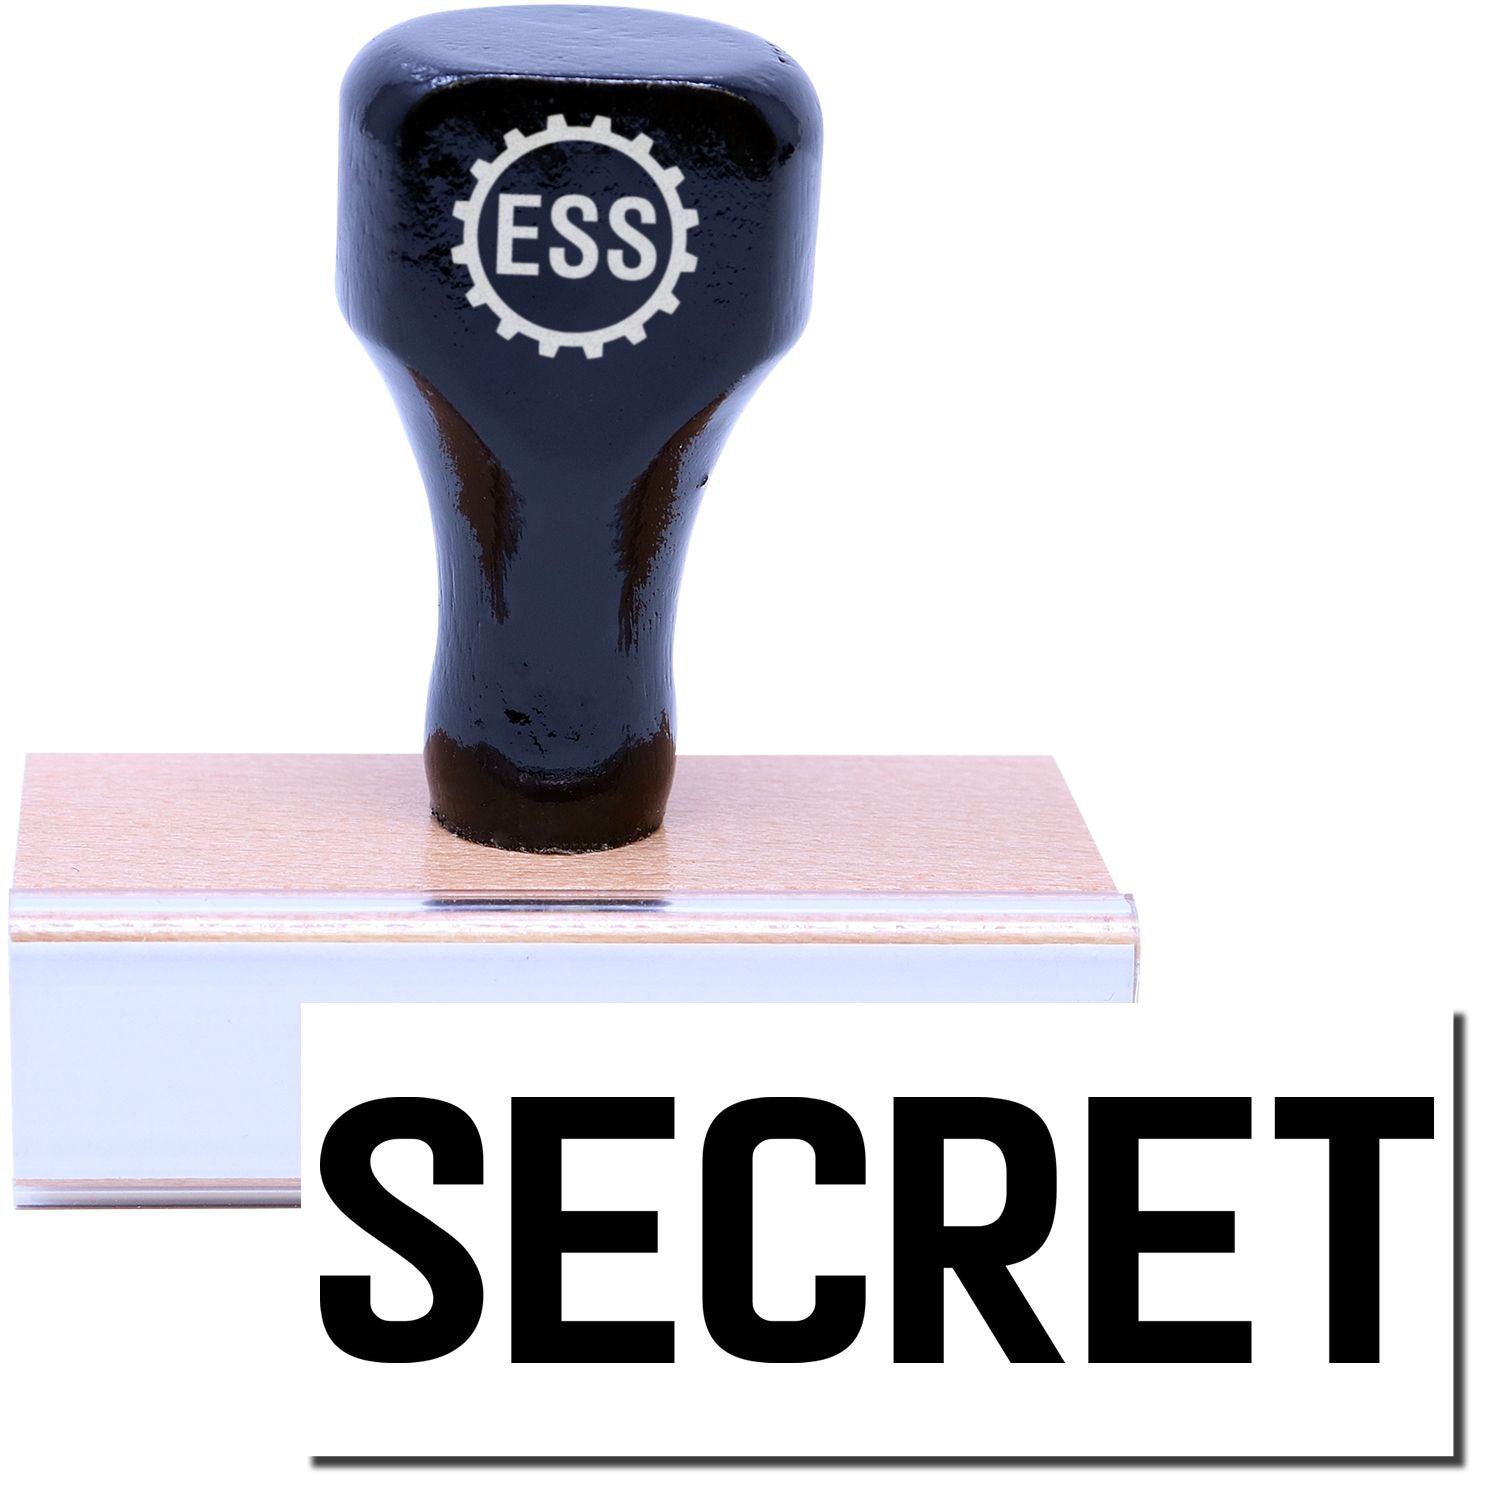 A stock office rubber stamp with a stamped image showing how the text "SECRET" in a large font is displayed after stamping.